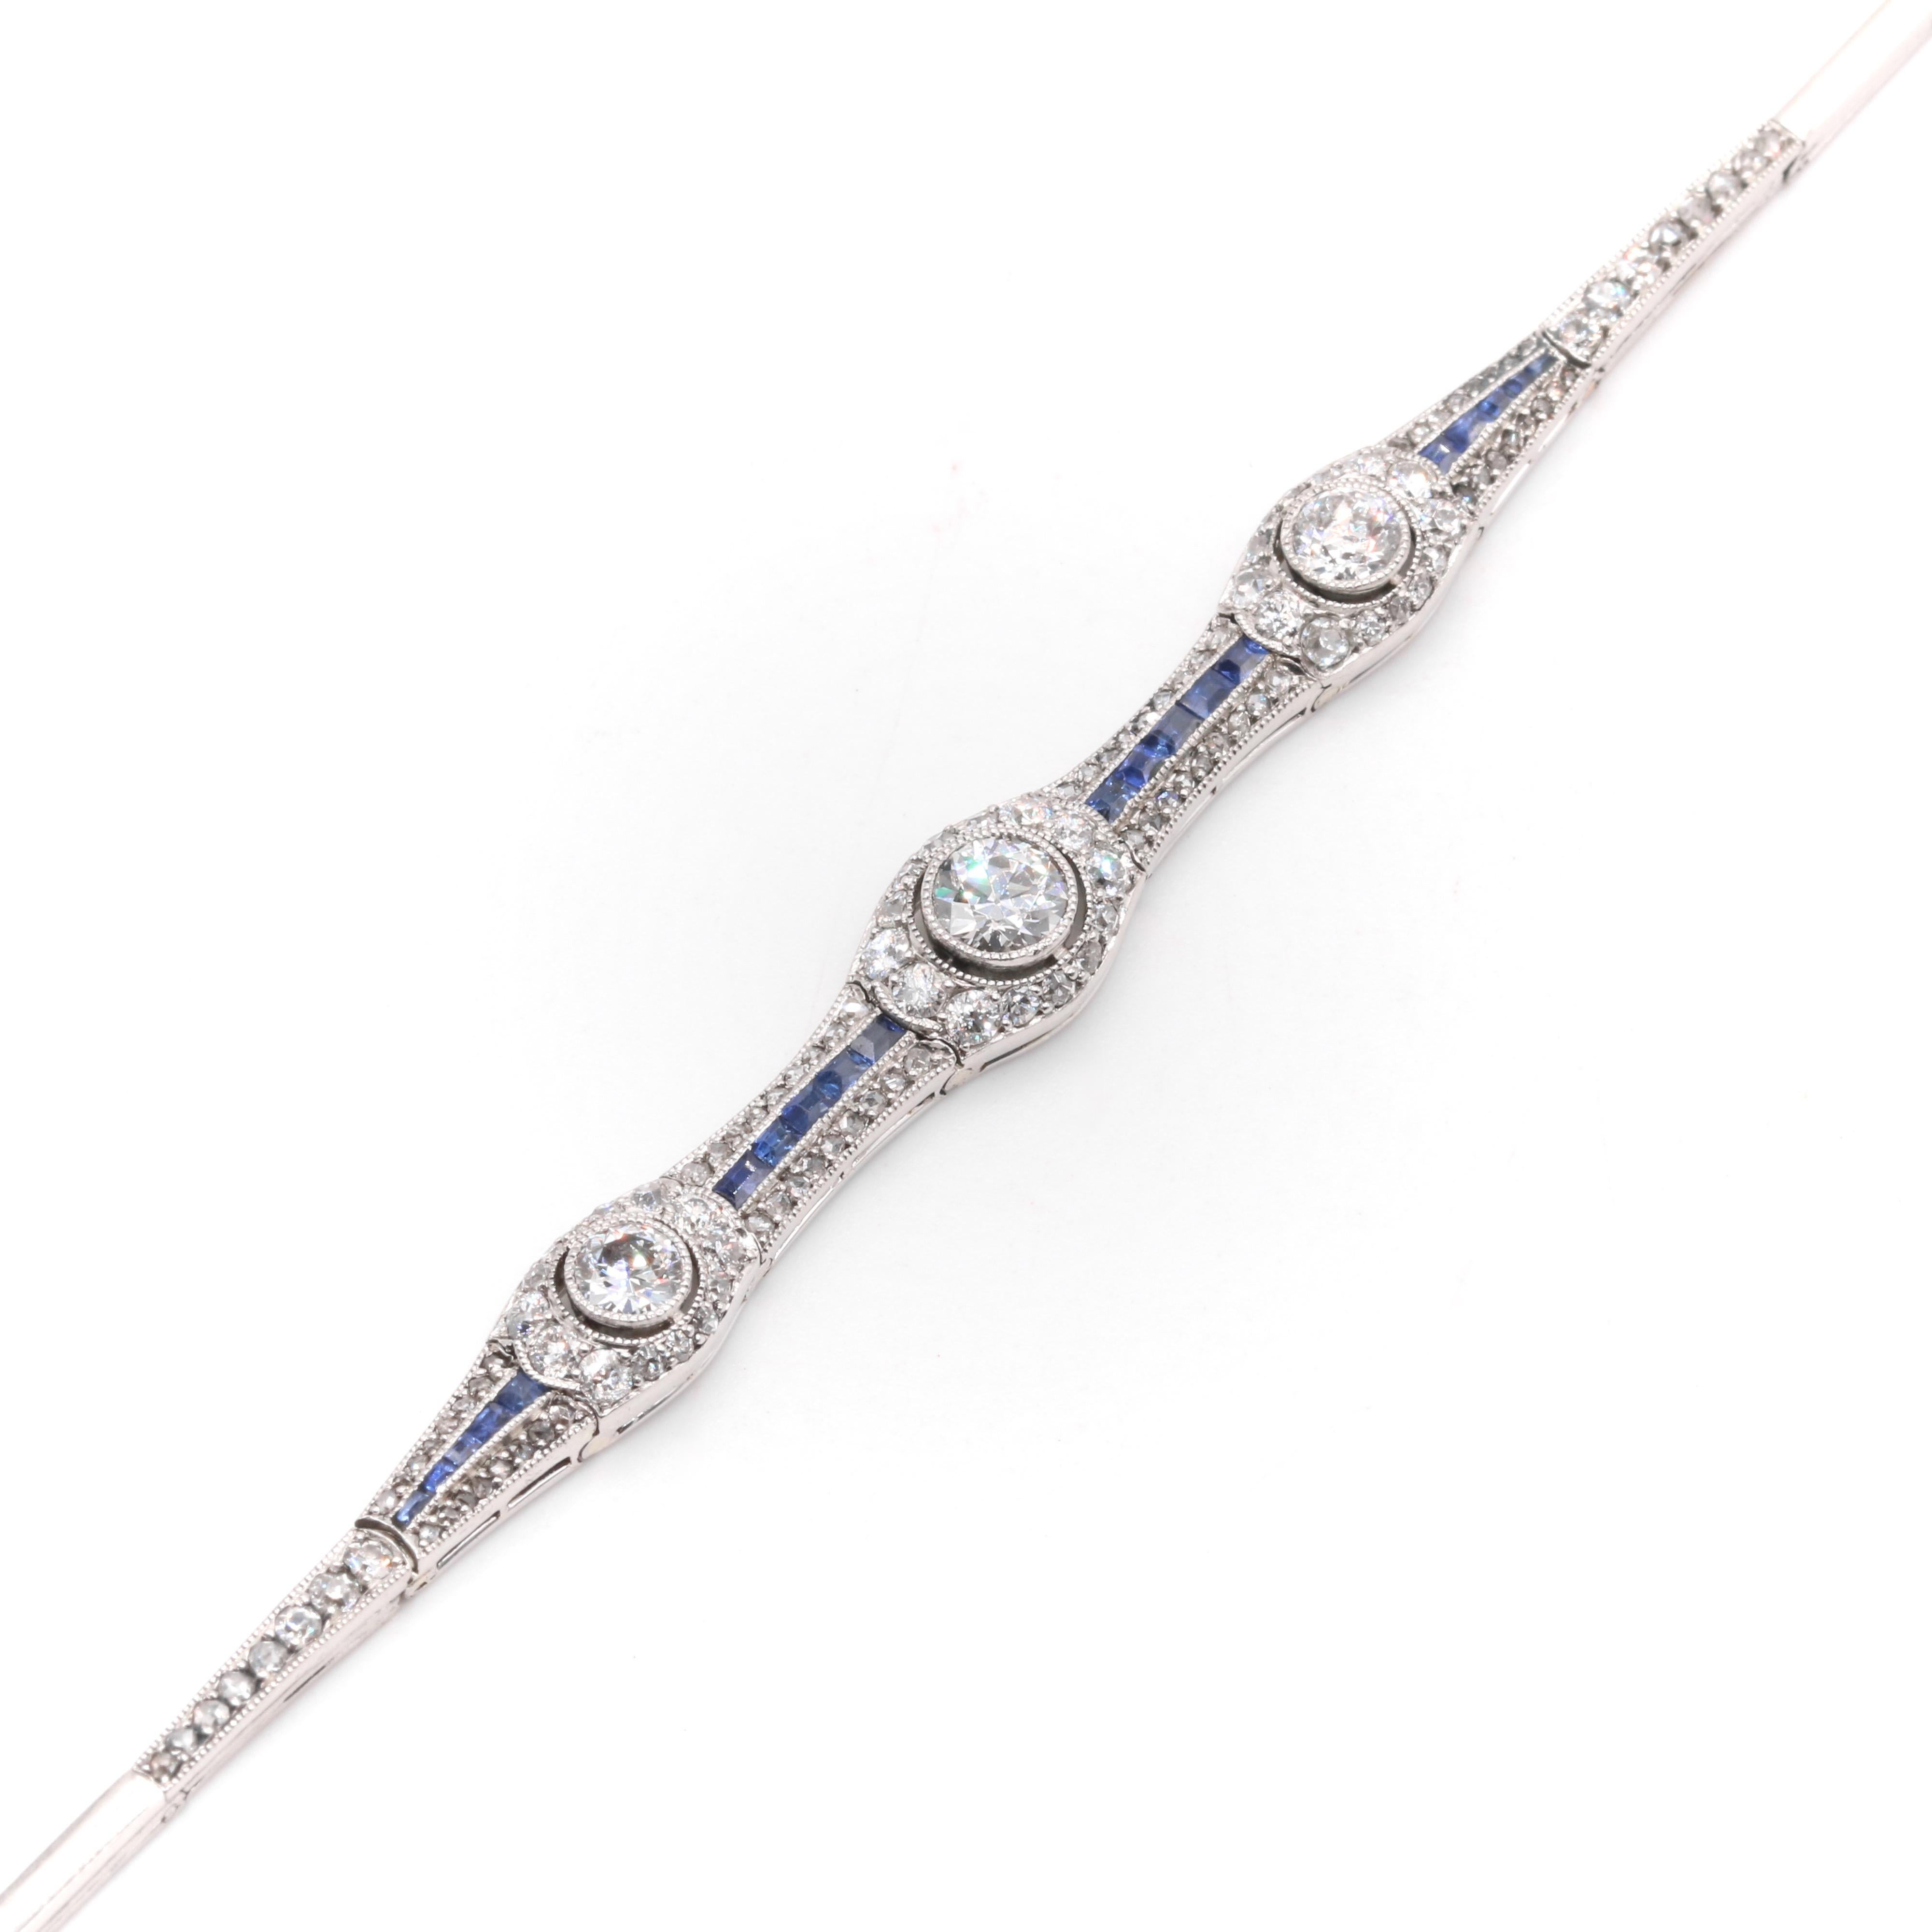 Antique Art Deco 1920s Platinum 1.96tgw Diamond and Sapphire Bracelet In Good Condition For Sale In Staines-Upon-Thames, GB